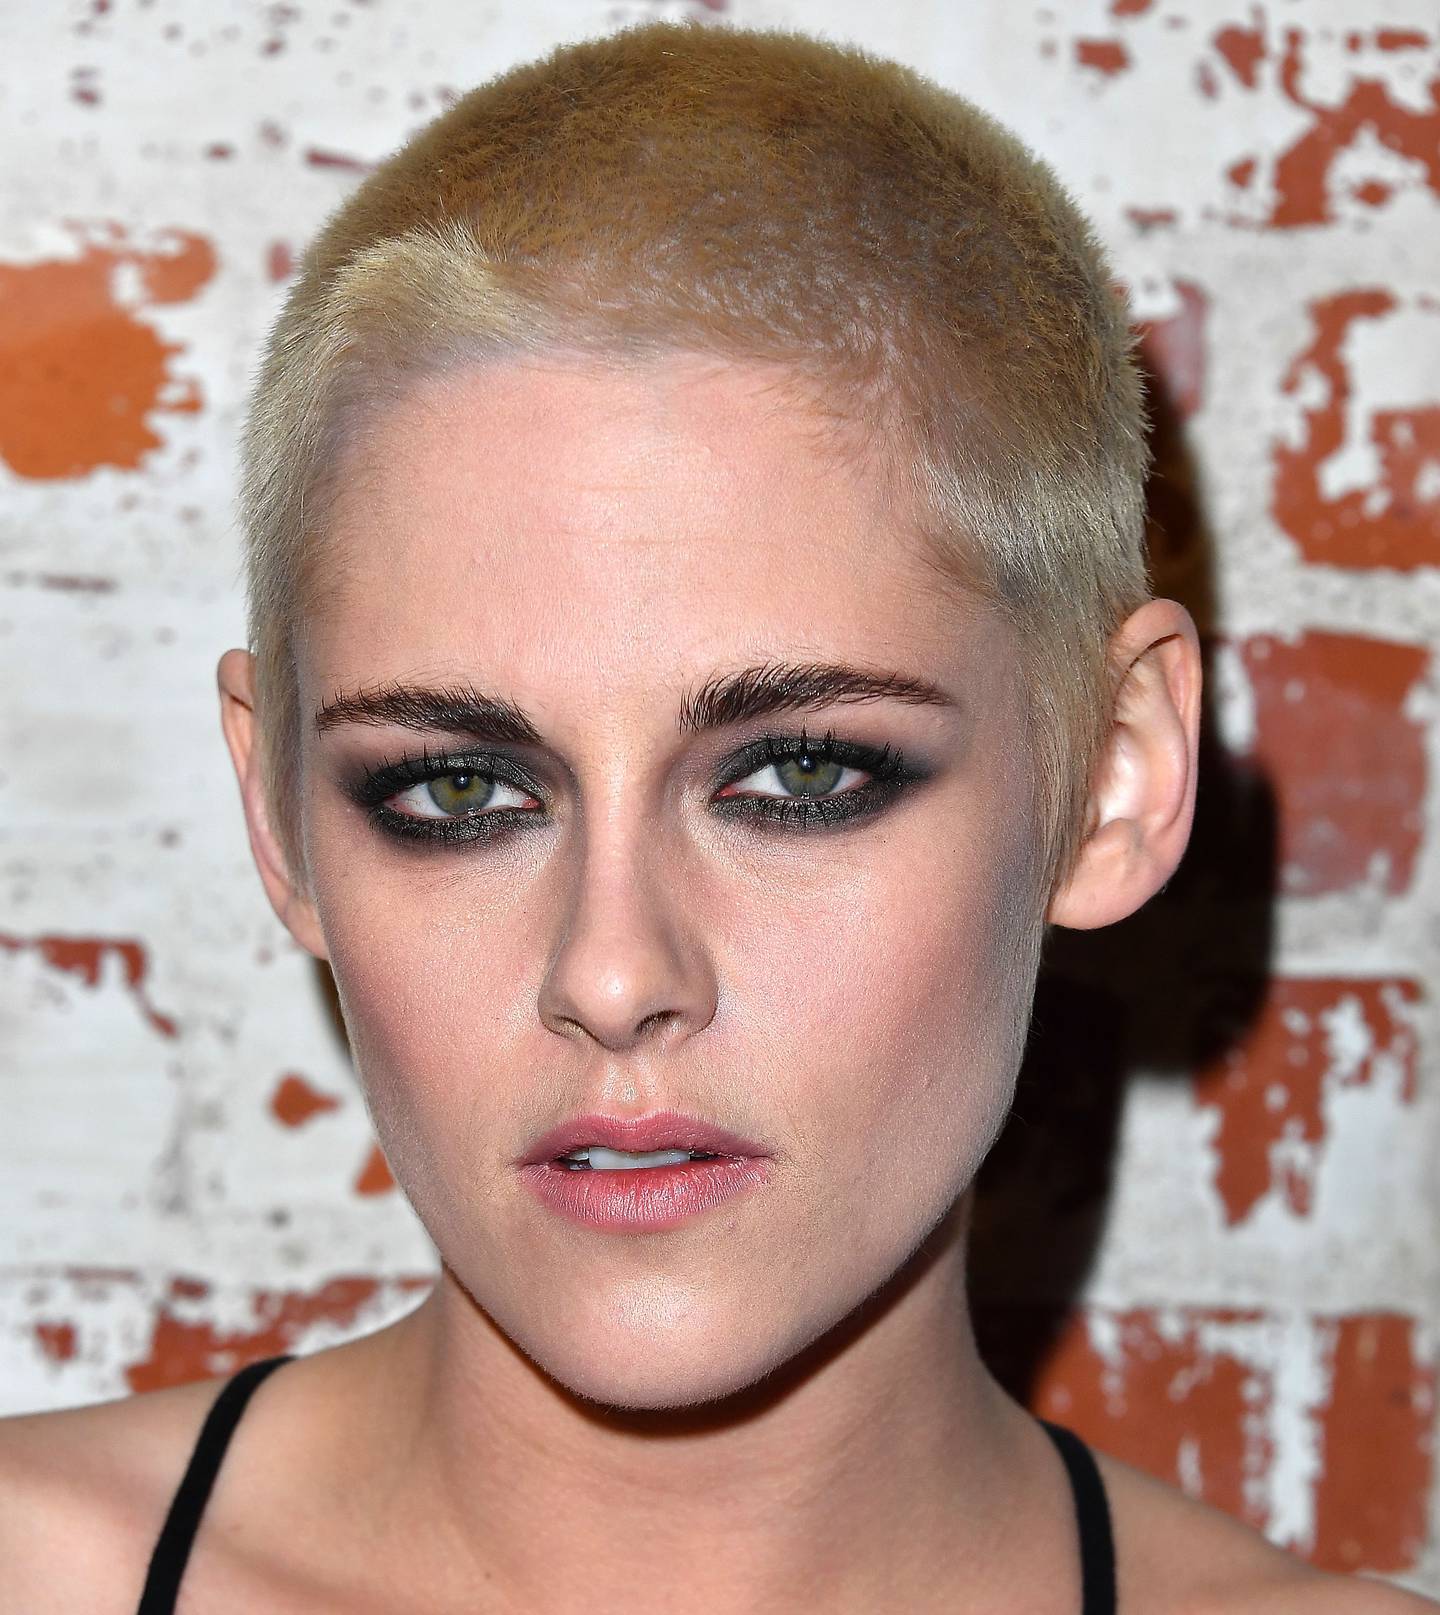 Kristen Stewart's new look has been approved by fans. Photo/Getty